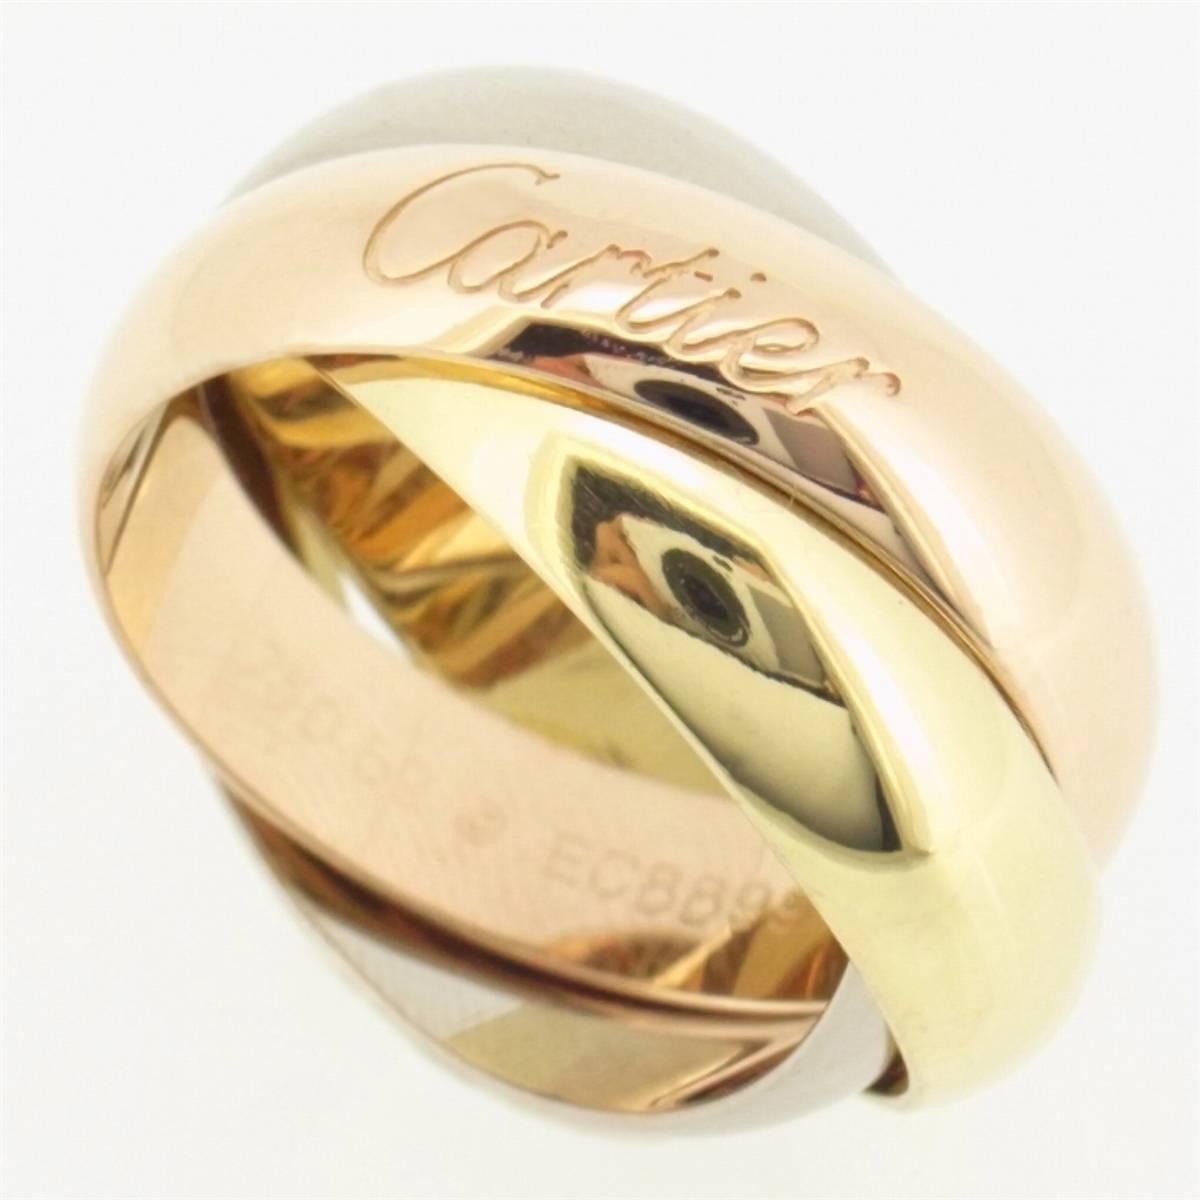 Cartier Trinity ring with three 18 karat gold bands in pink, yellow and white gold. Large model with band width measuring 5mm. 

Ring size is approximately 6 but will fit a 6.25 as well. 

Stamped European size 49 inside. 

100% Authentic. There are